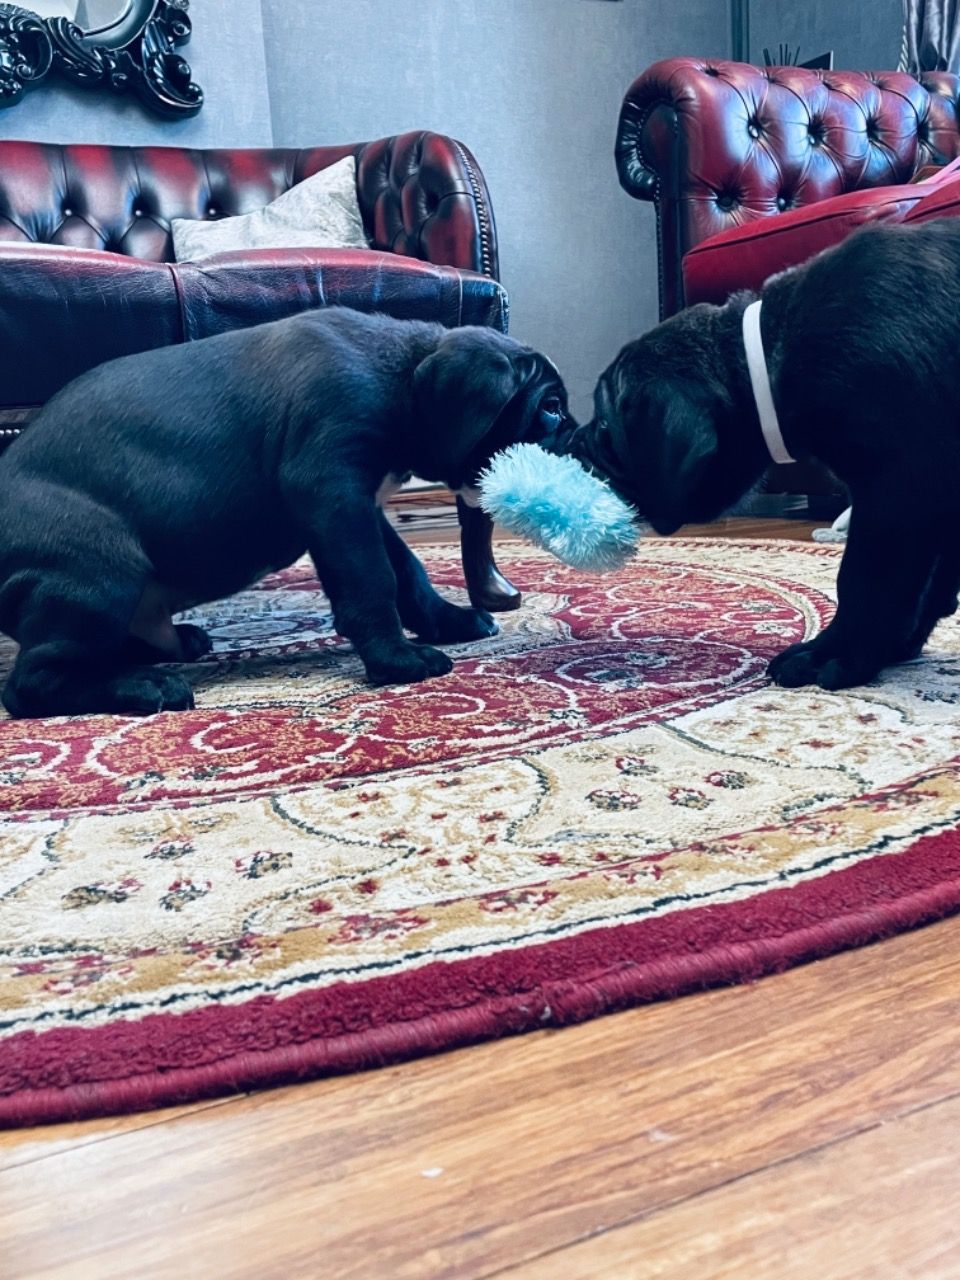 Cane Corso Puppies for sale +447440524997